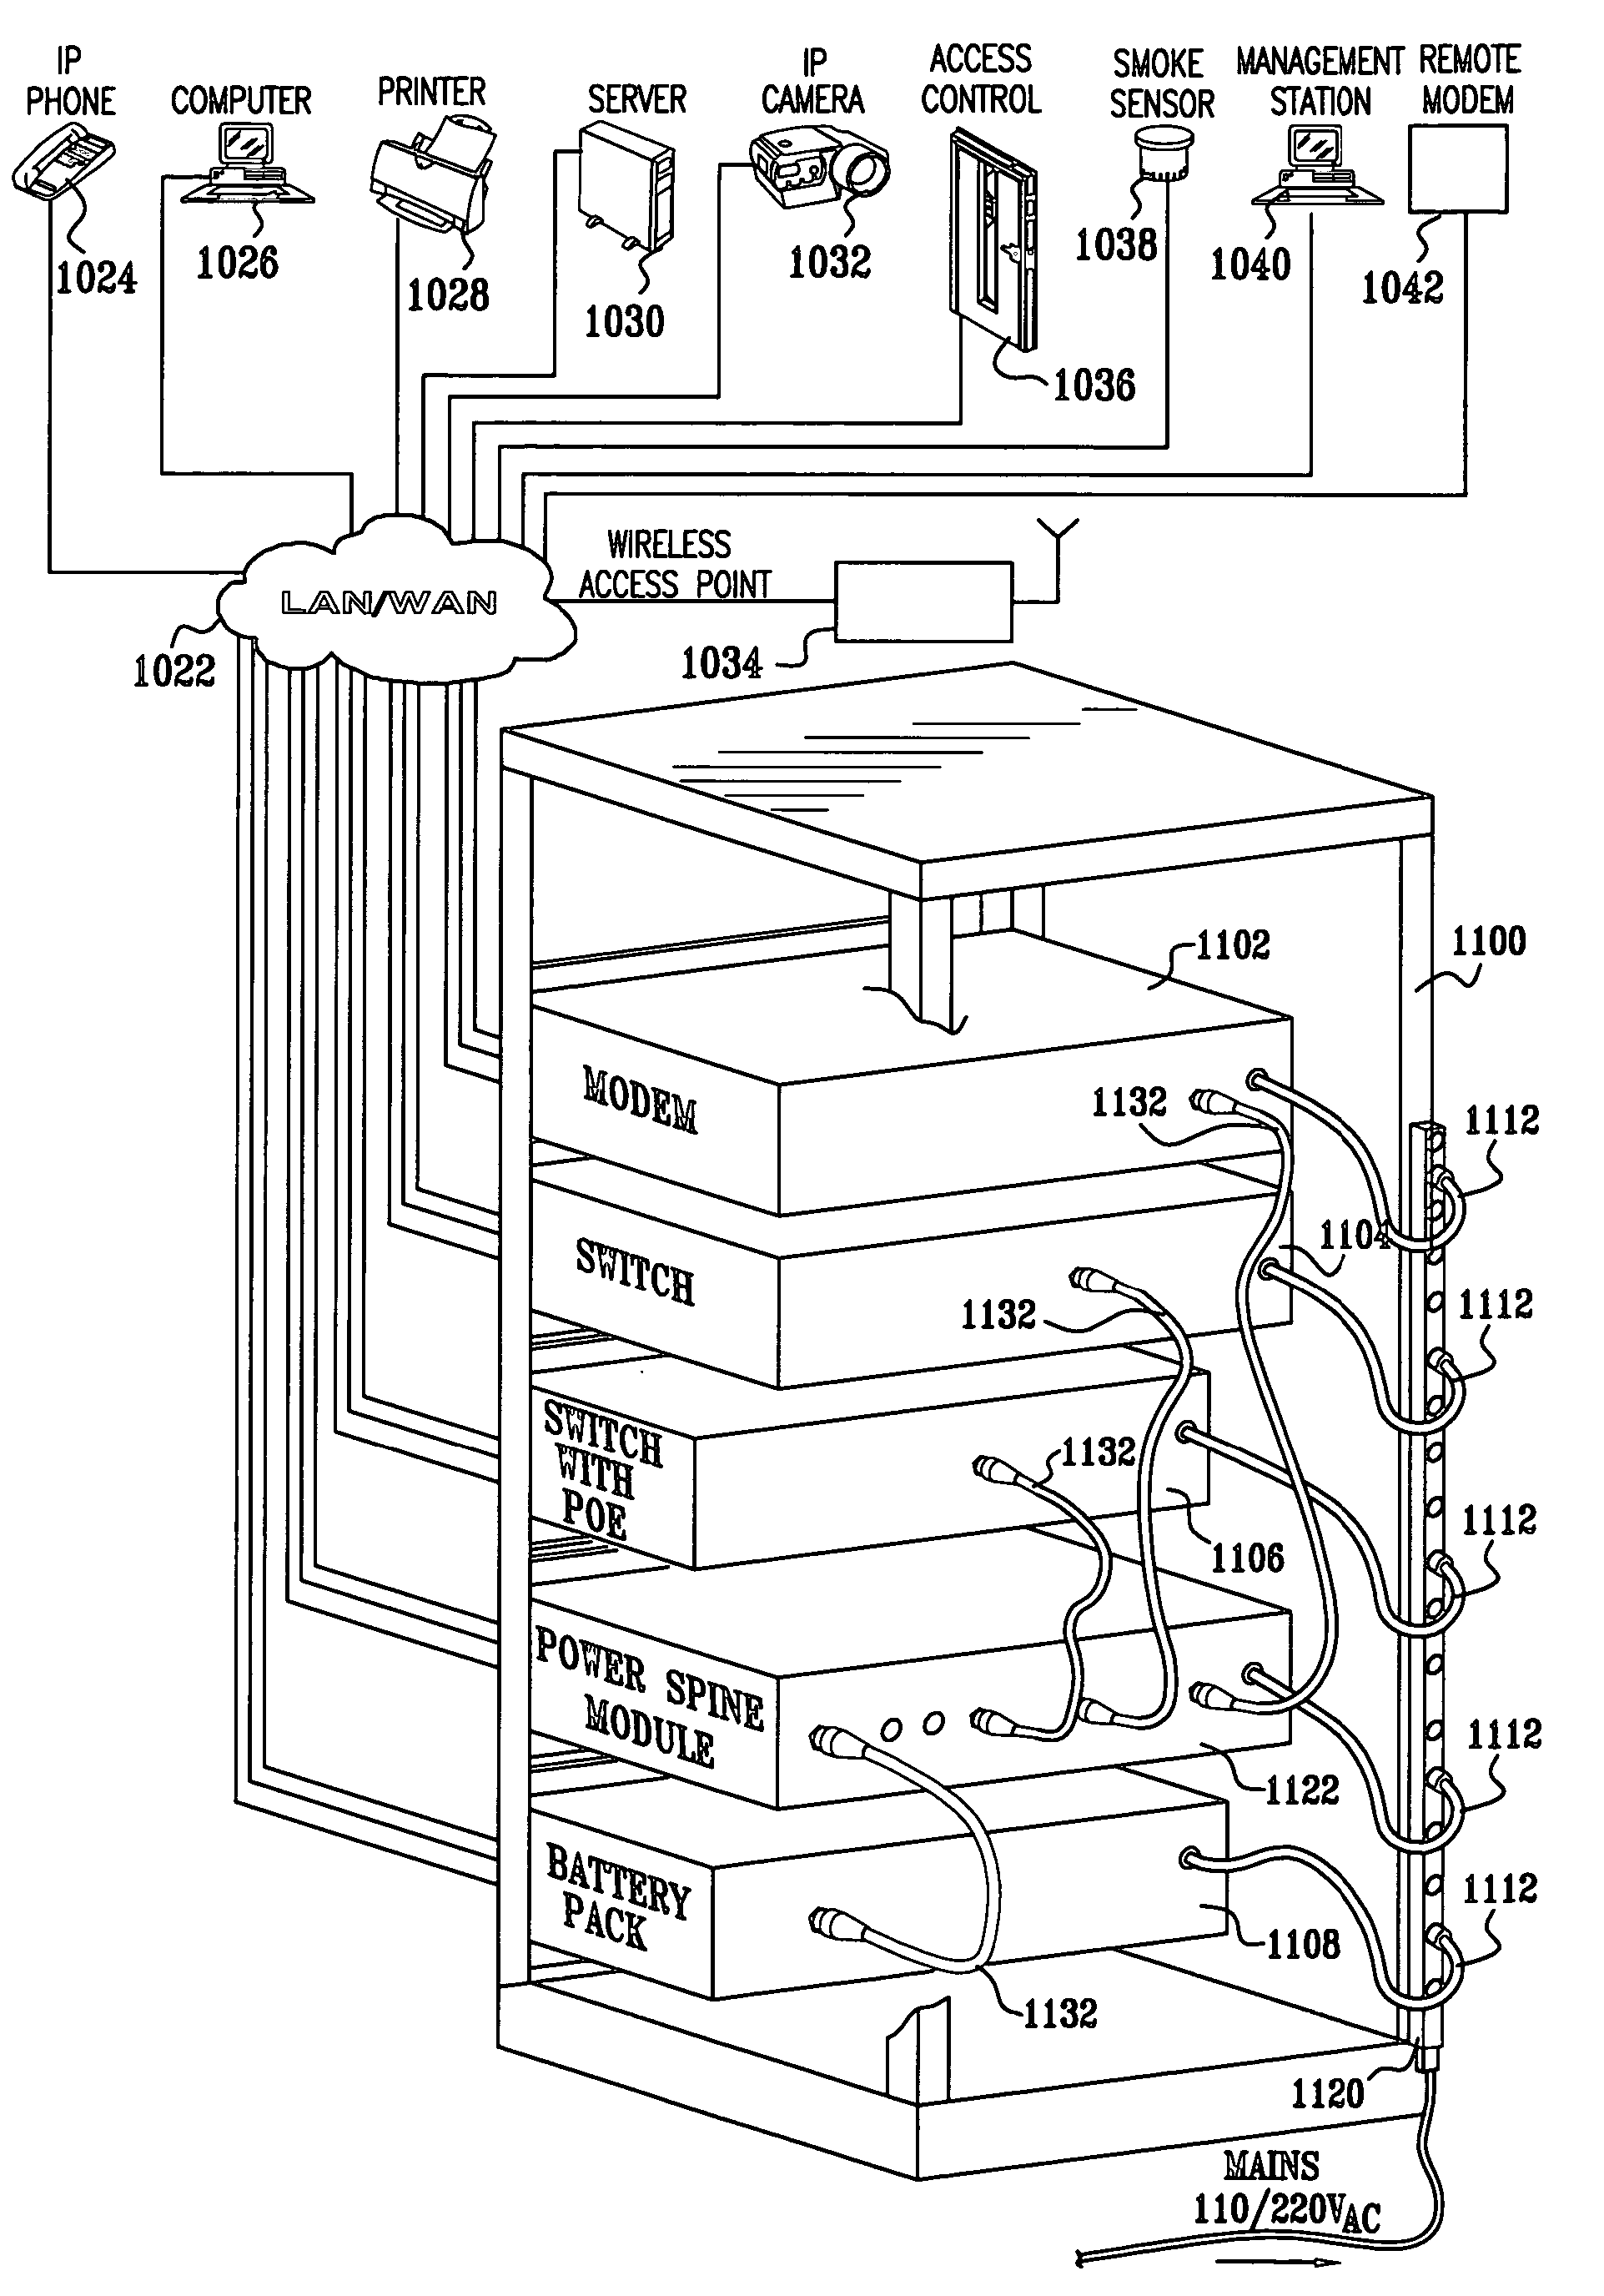 Direct current power pooling for an ethernet network